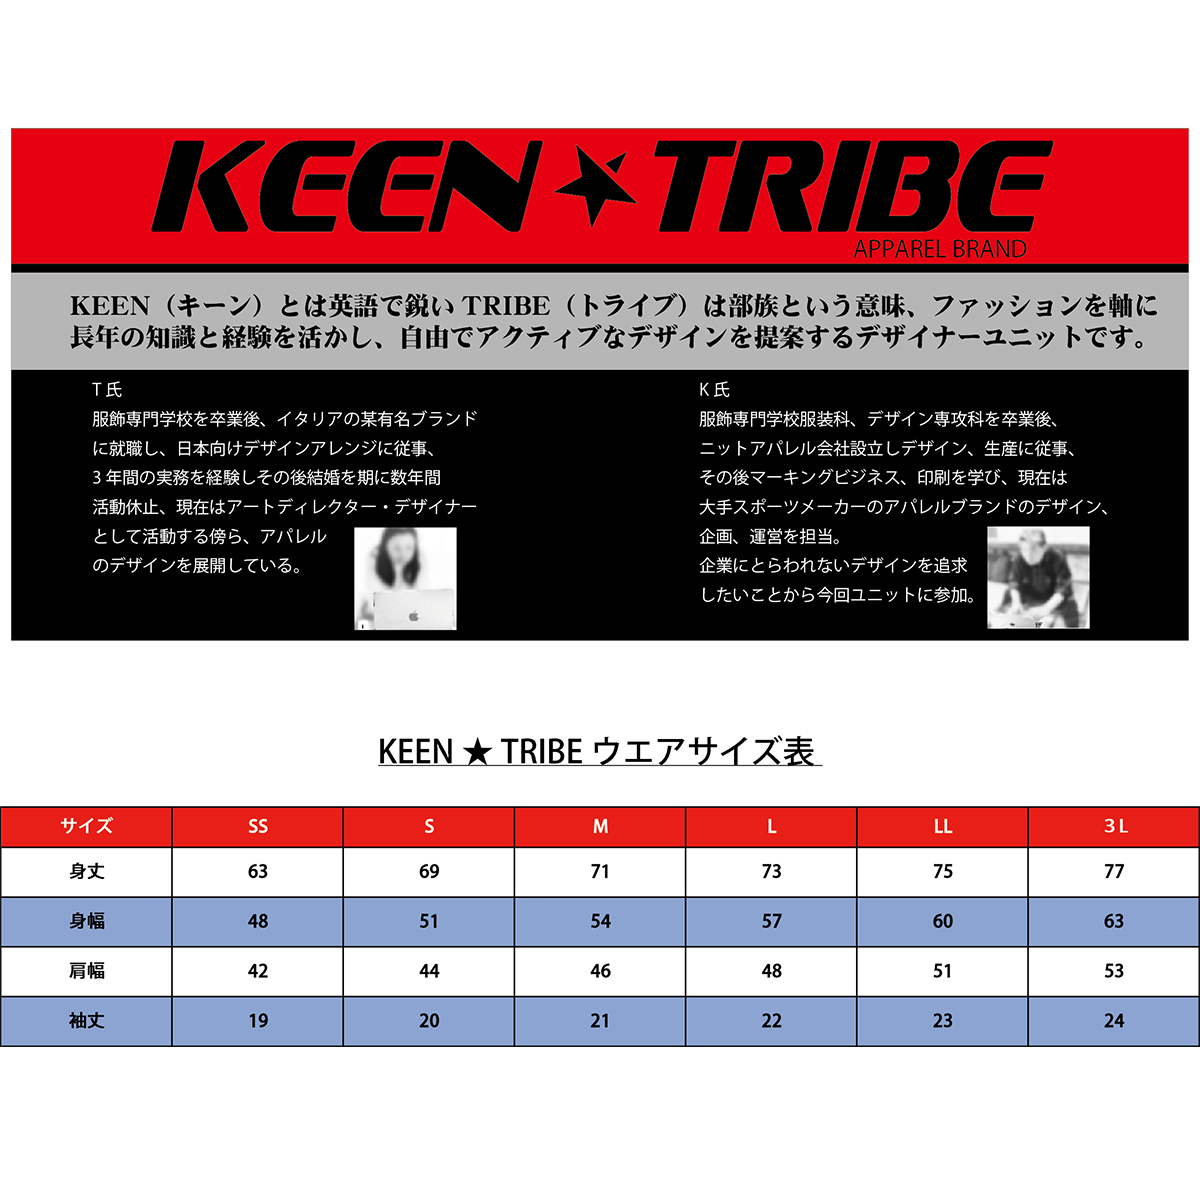 KEEN ★ TRIBE　KT-22(受注生産)